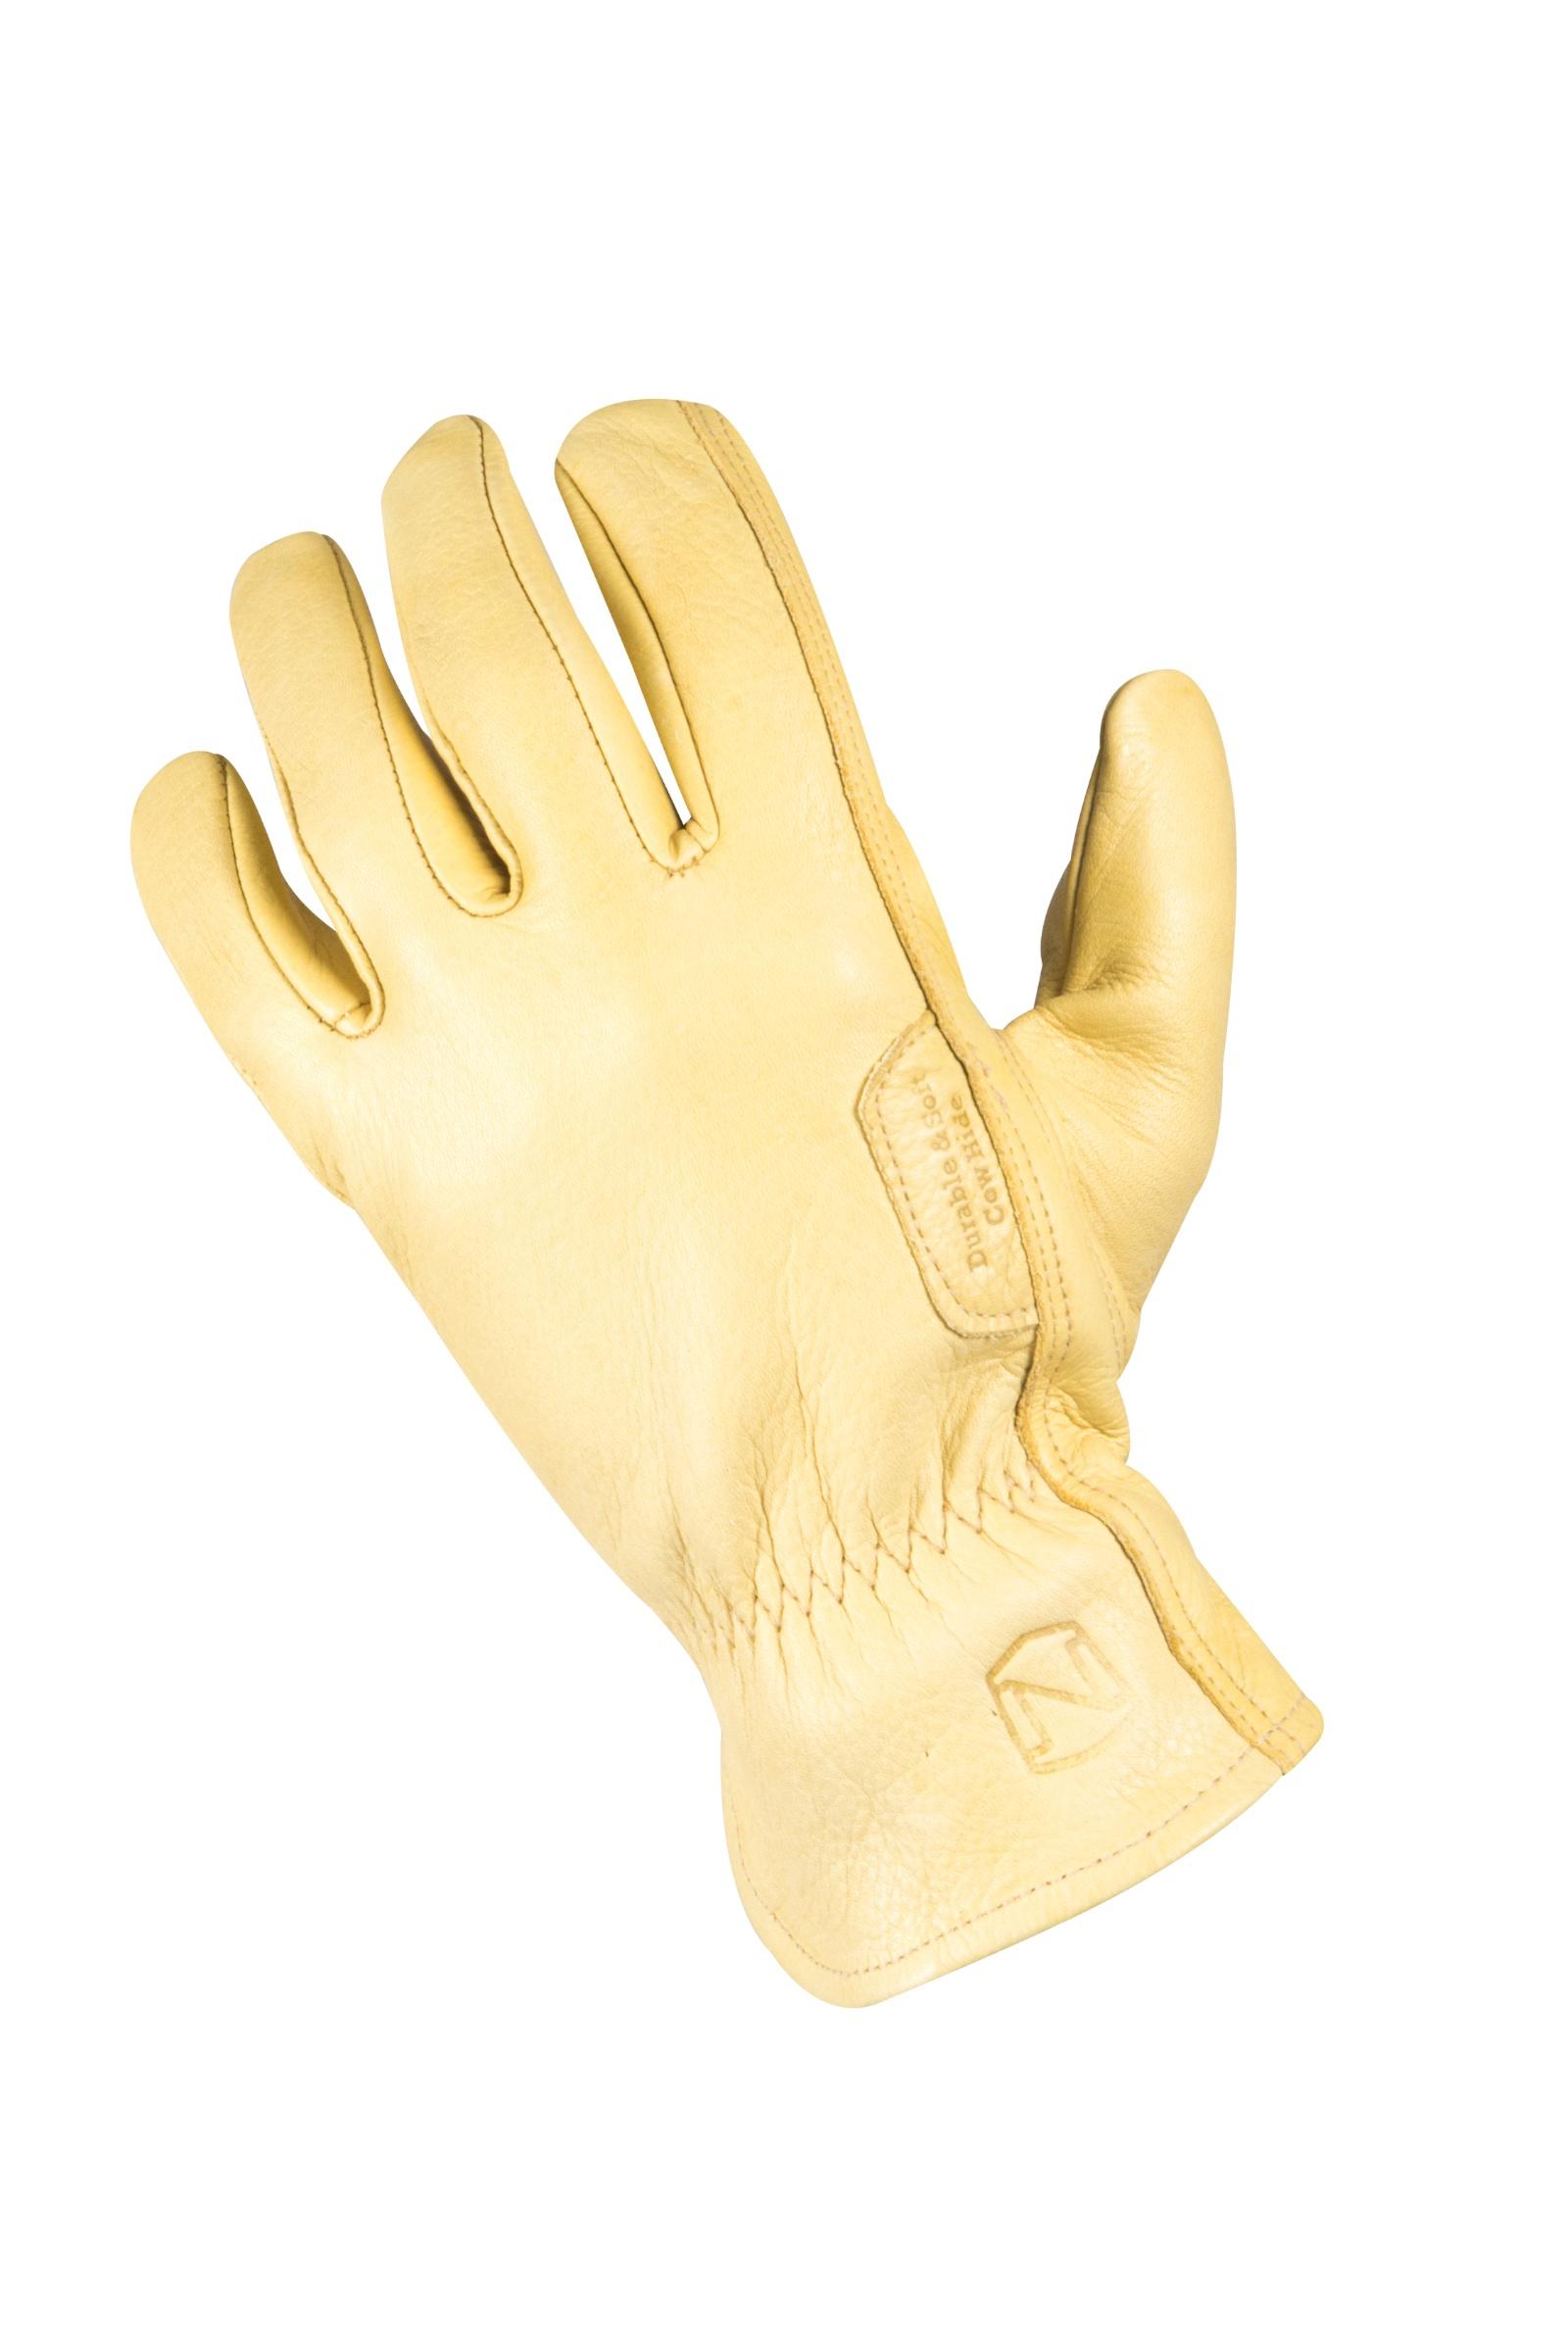 Noble Outfitters Leather Work Glove cowhide